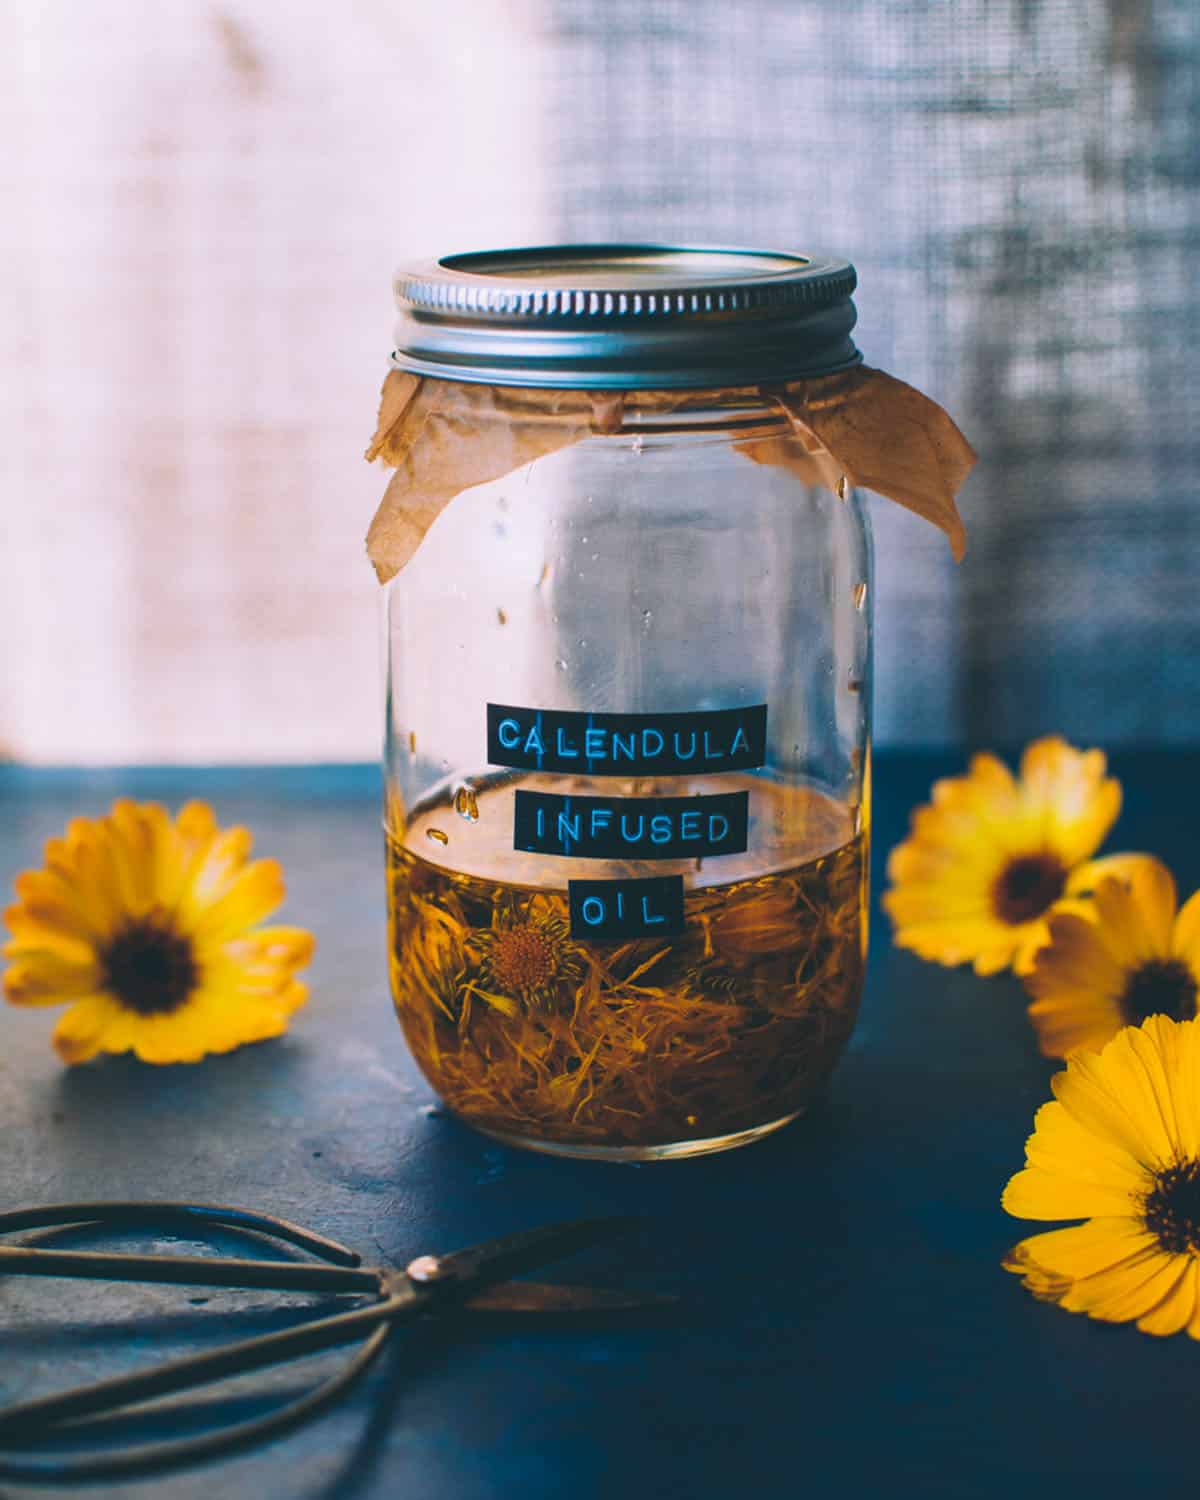 A closed jar with a label reading "calendula infused oil" that has calendula flowers infusing in a jar with oil, surrounded by calendula flowers. 